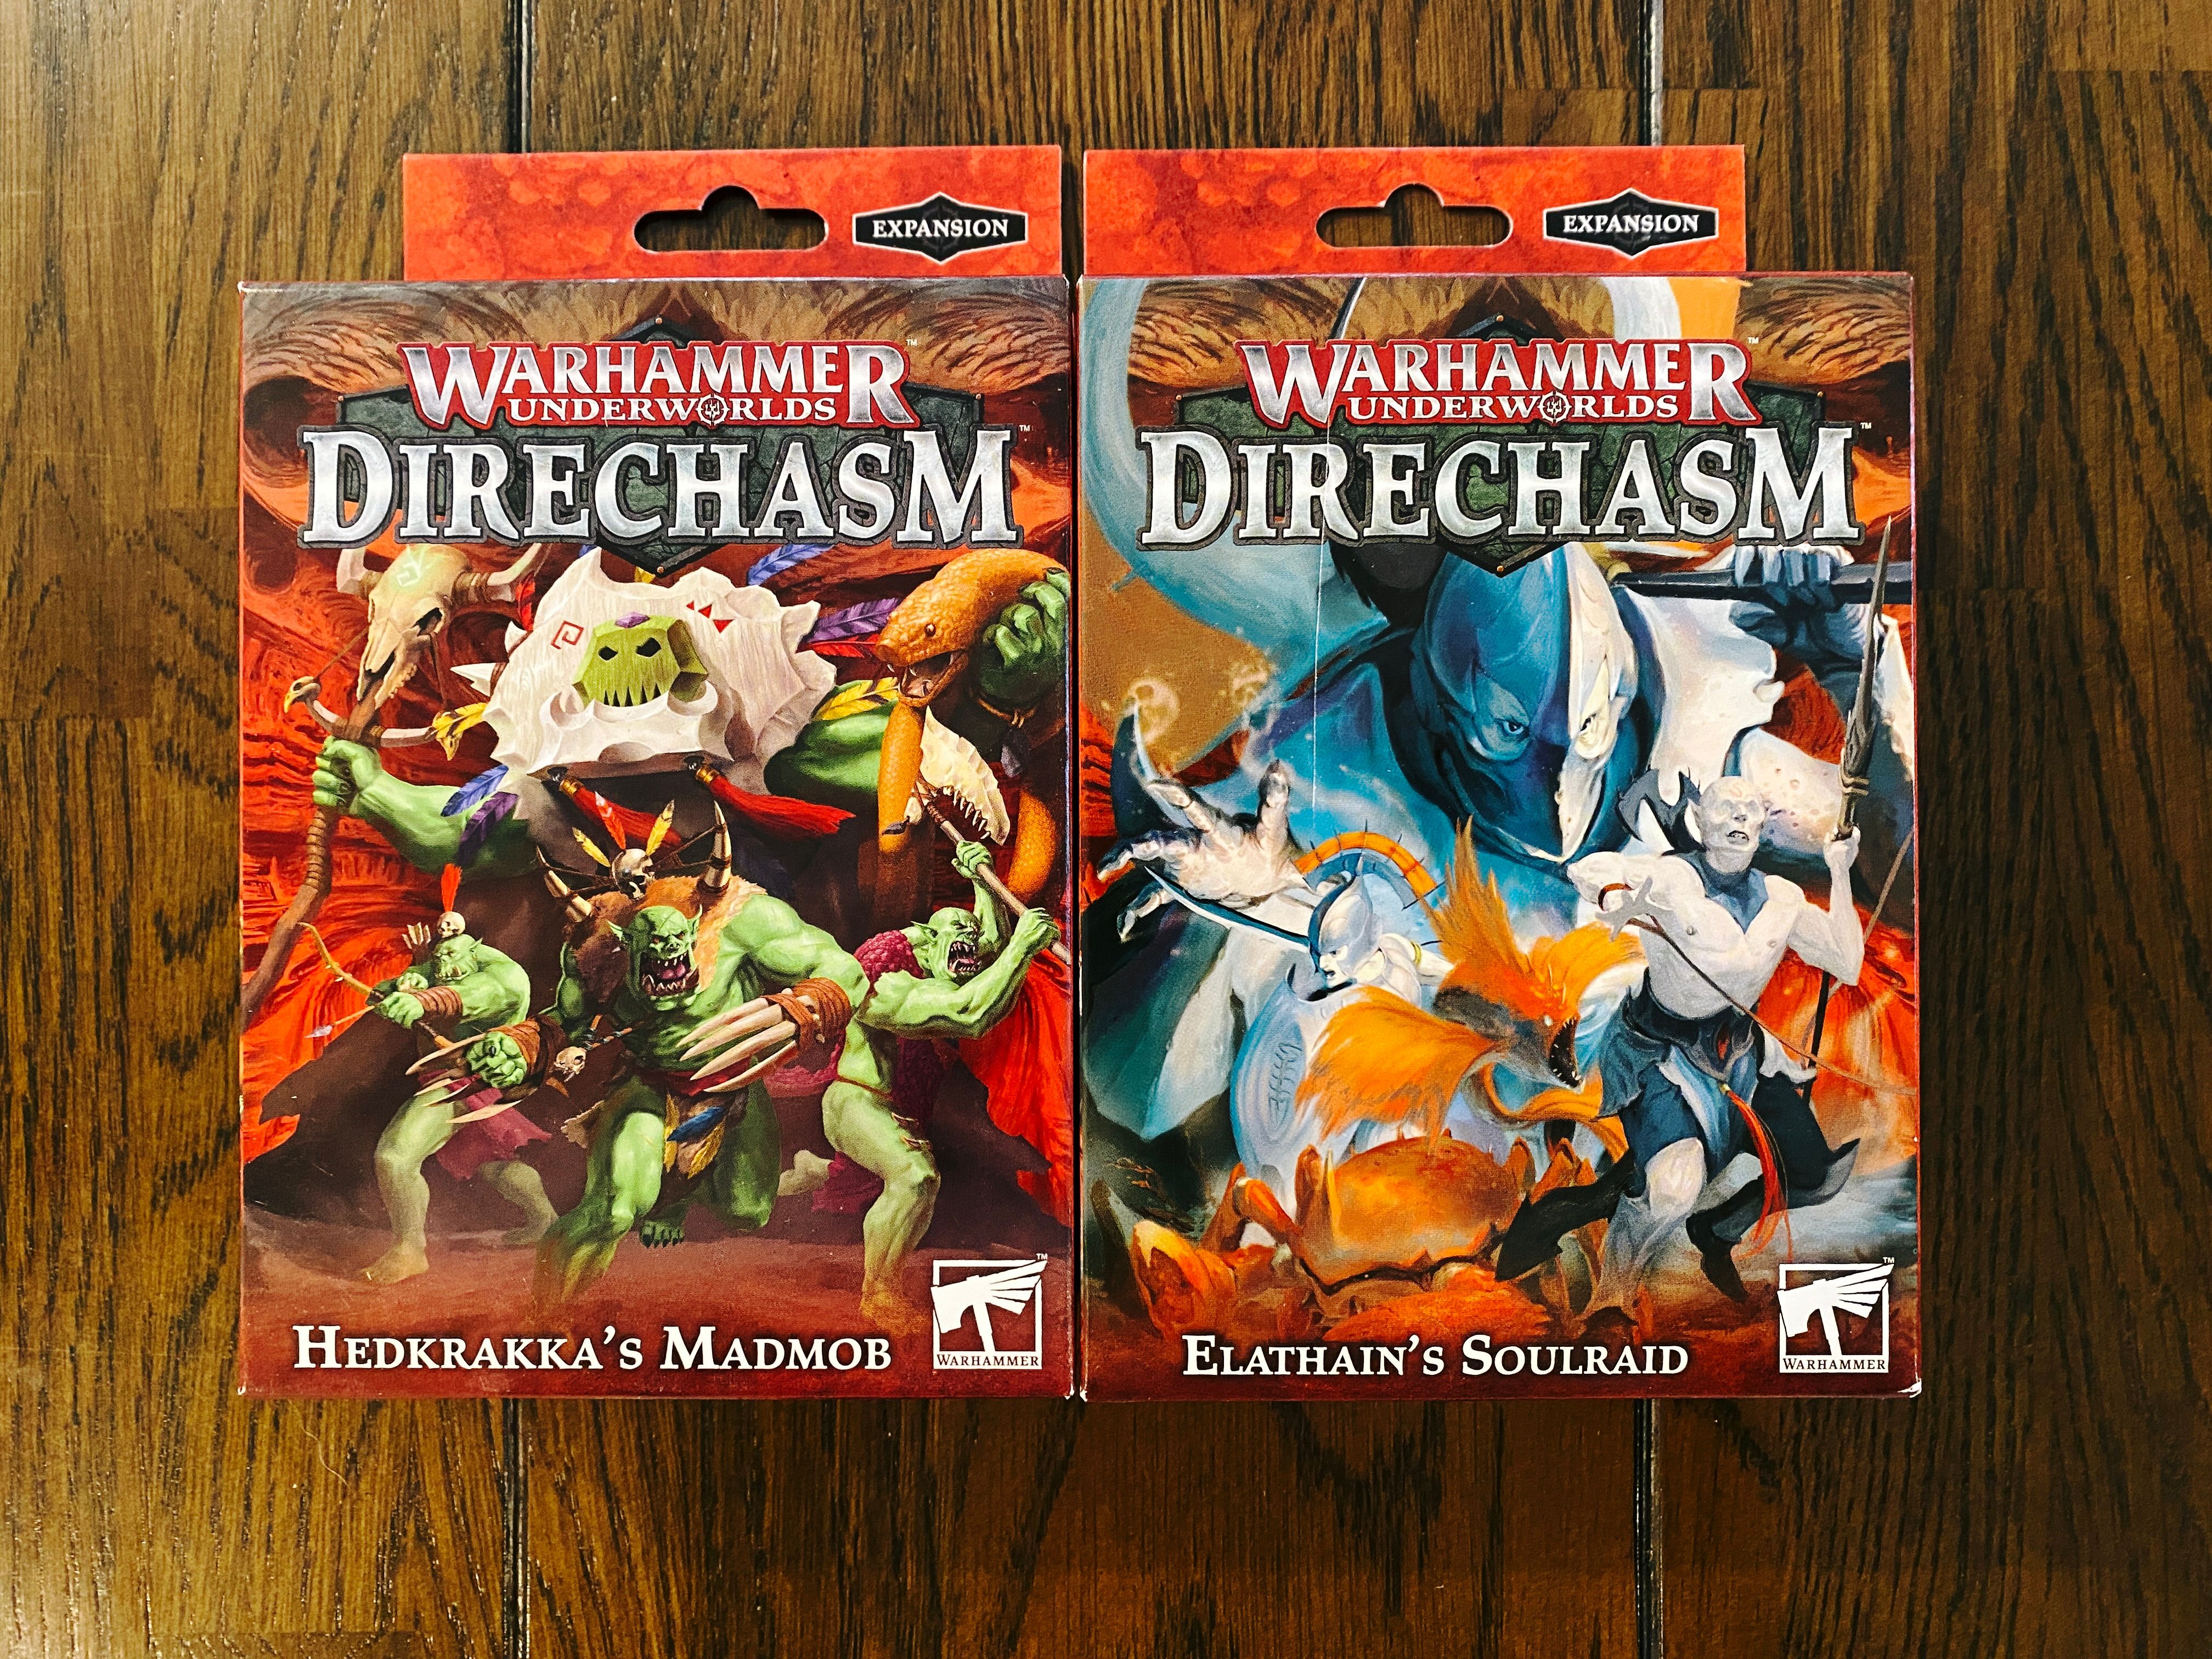 A photo of the boxes of two miniature sets for Warhammer Underworlds. Hedkrakka's Madmob is a tribe of green orcs with loinclothes and basic but savage-looking weaponry, and Elathan's Soulraid are a group of extremely pale elves who live underwater.